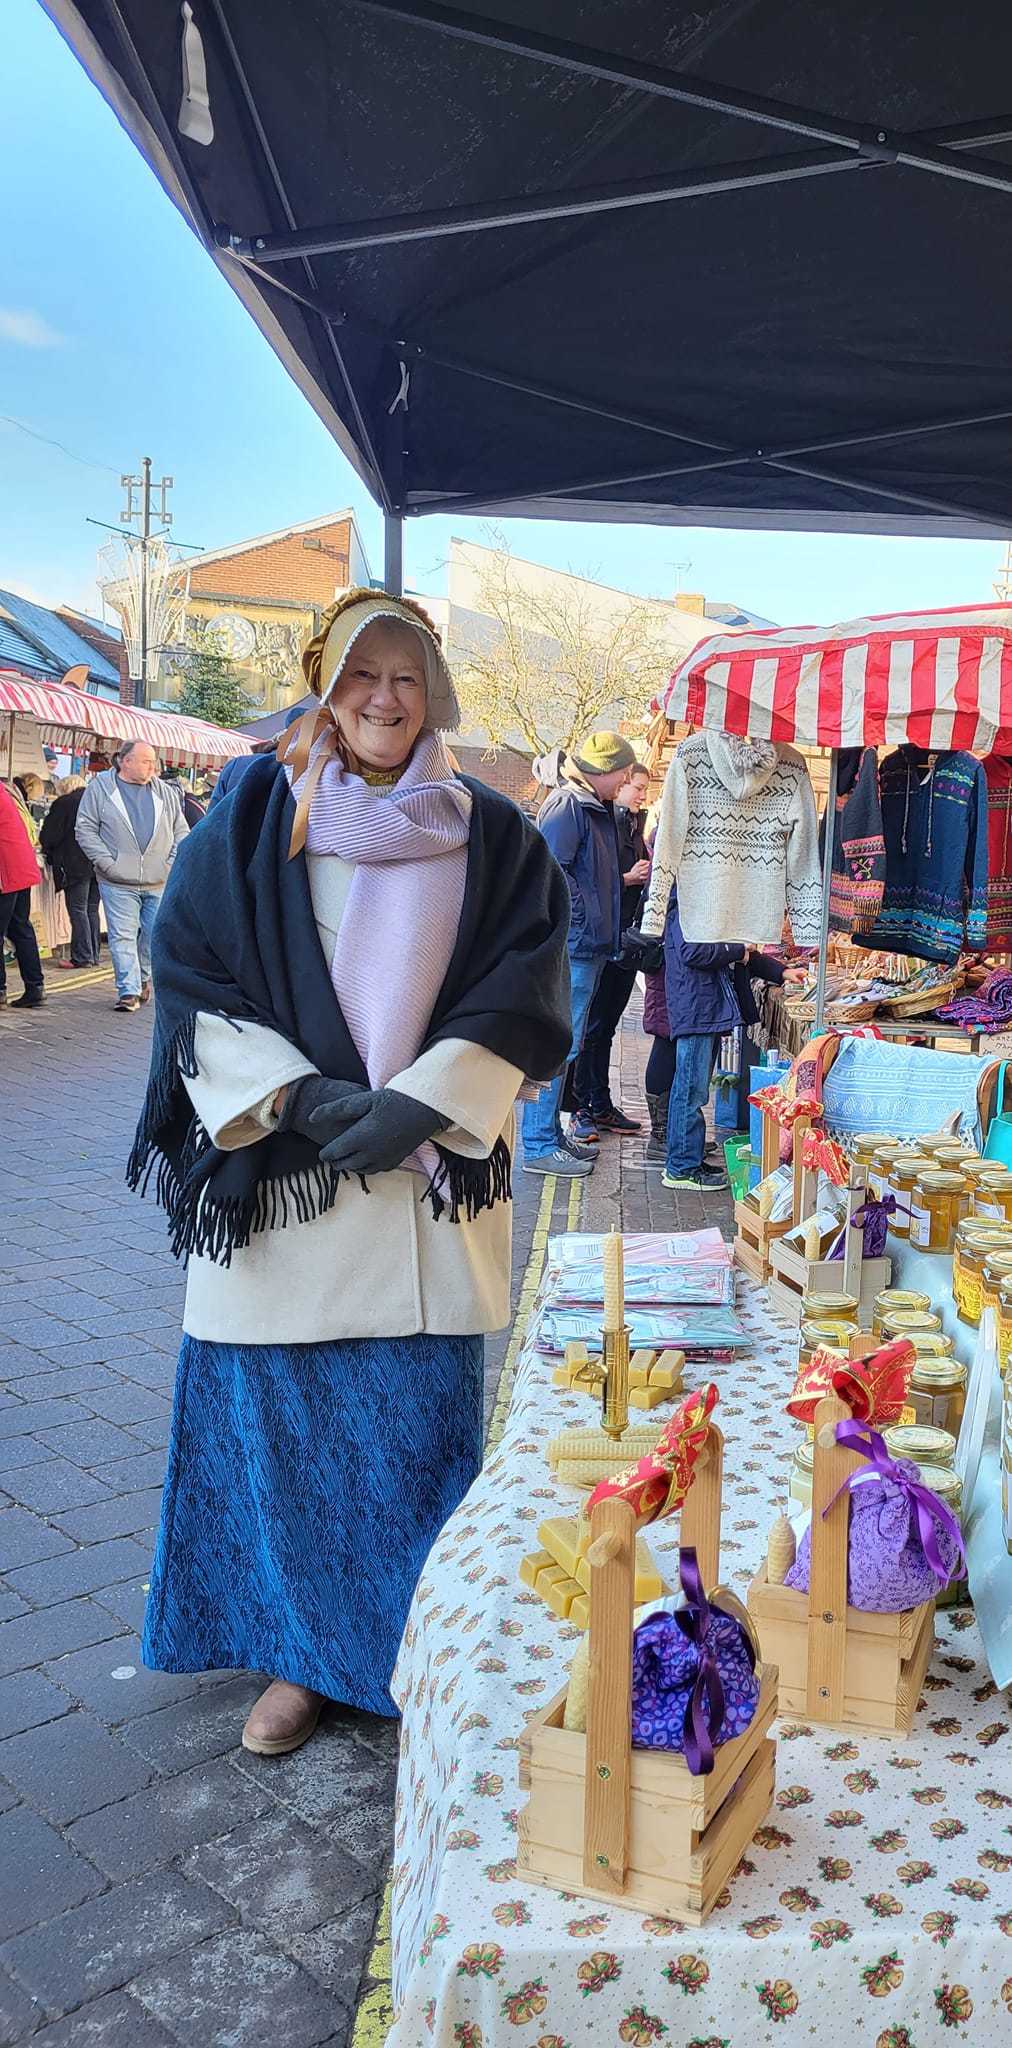 There were more than 40 stalls at the market. Picture: Virginie Alexandra Jacquet/Hereford Times Camera Club